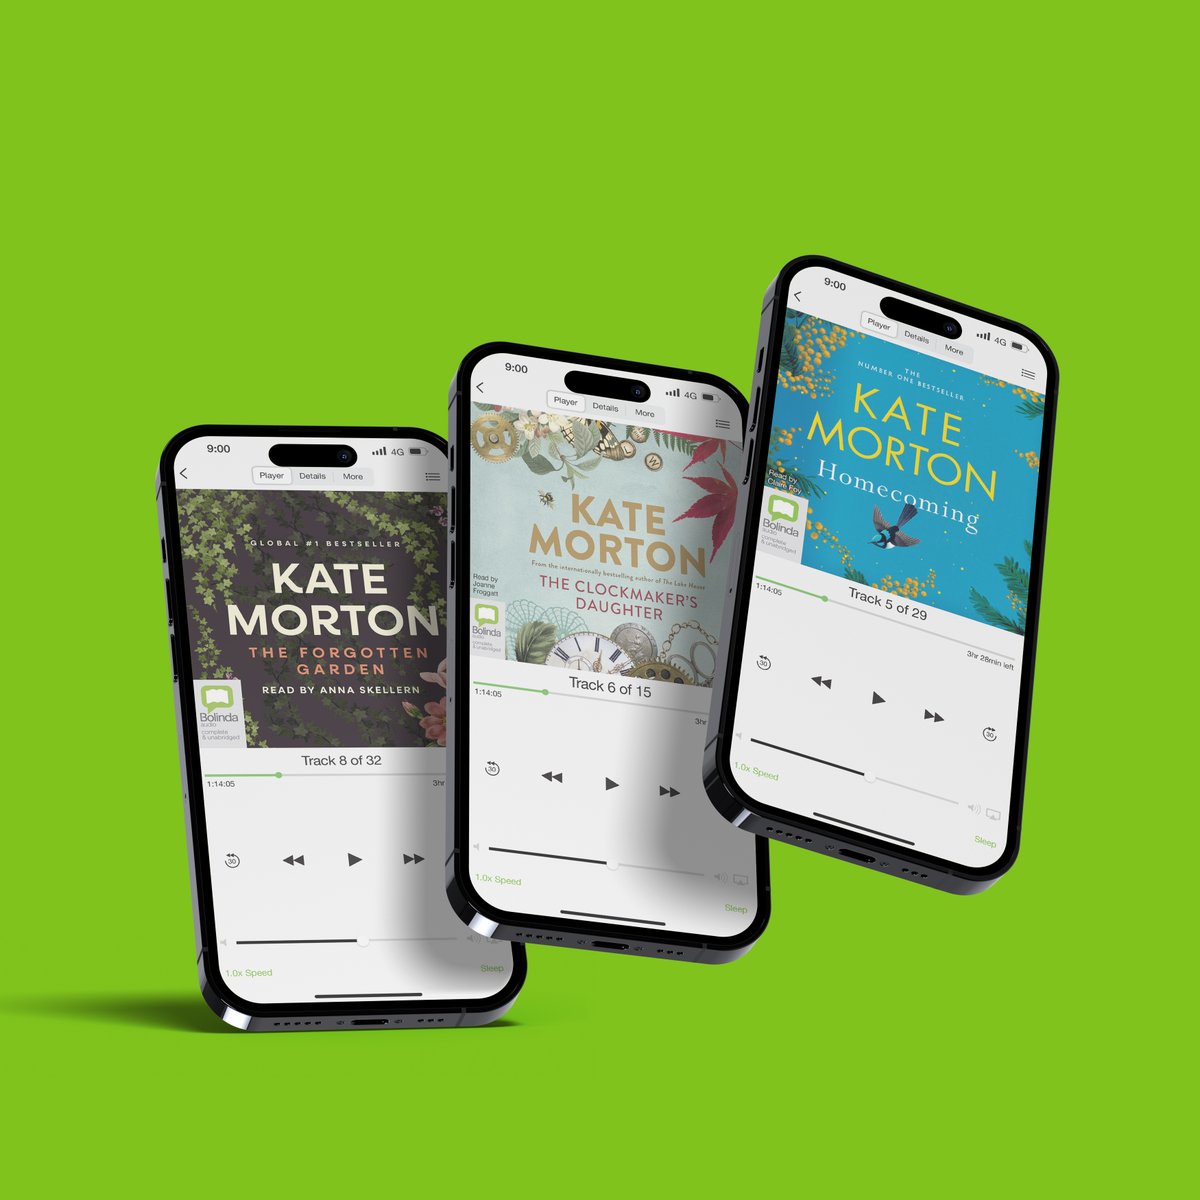 Don't miss BorrowBox's special Q&A with the award-winning and worldwide bestselling author, Kate Morton. Join us on Zoom with your friends and family on 9th April at 7pm AEST and 10am GMT for UK by registering here: ow.ly/xryb50R2Pcj @AllenAndUnwin @panmacmillan